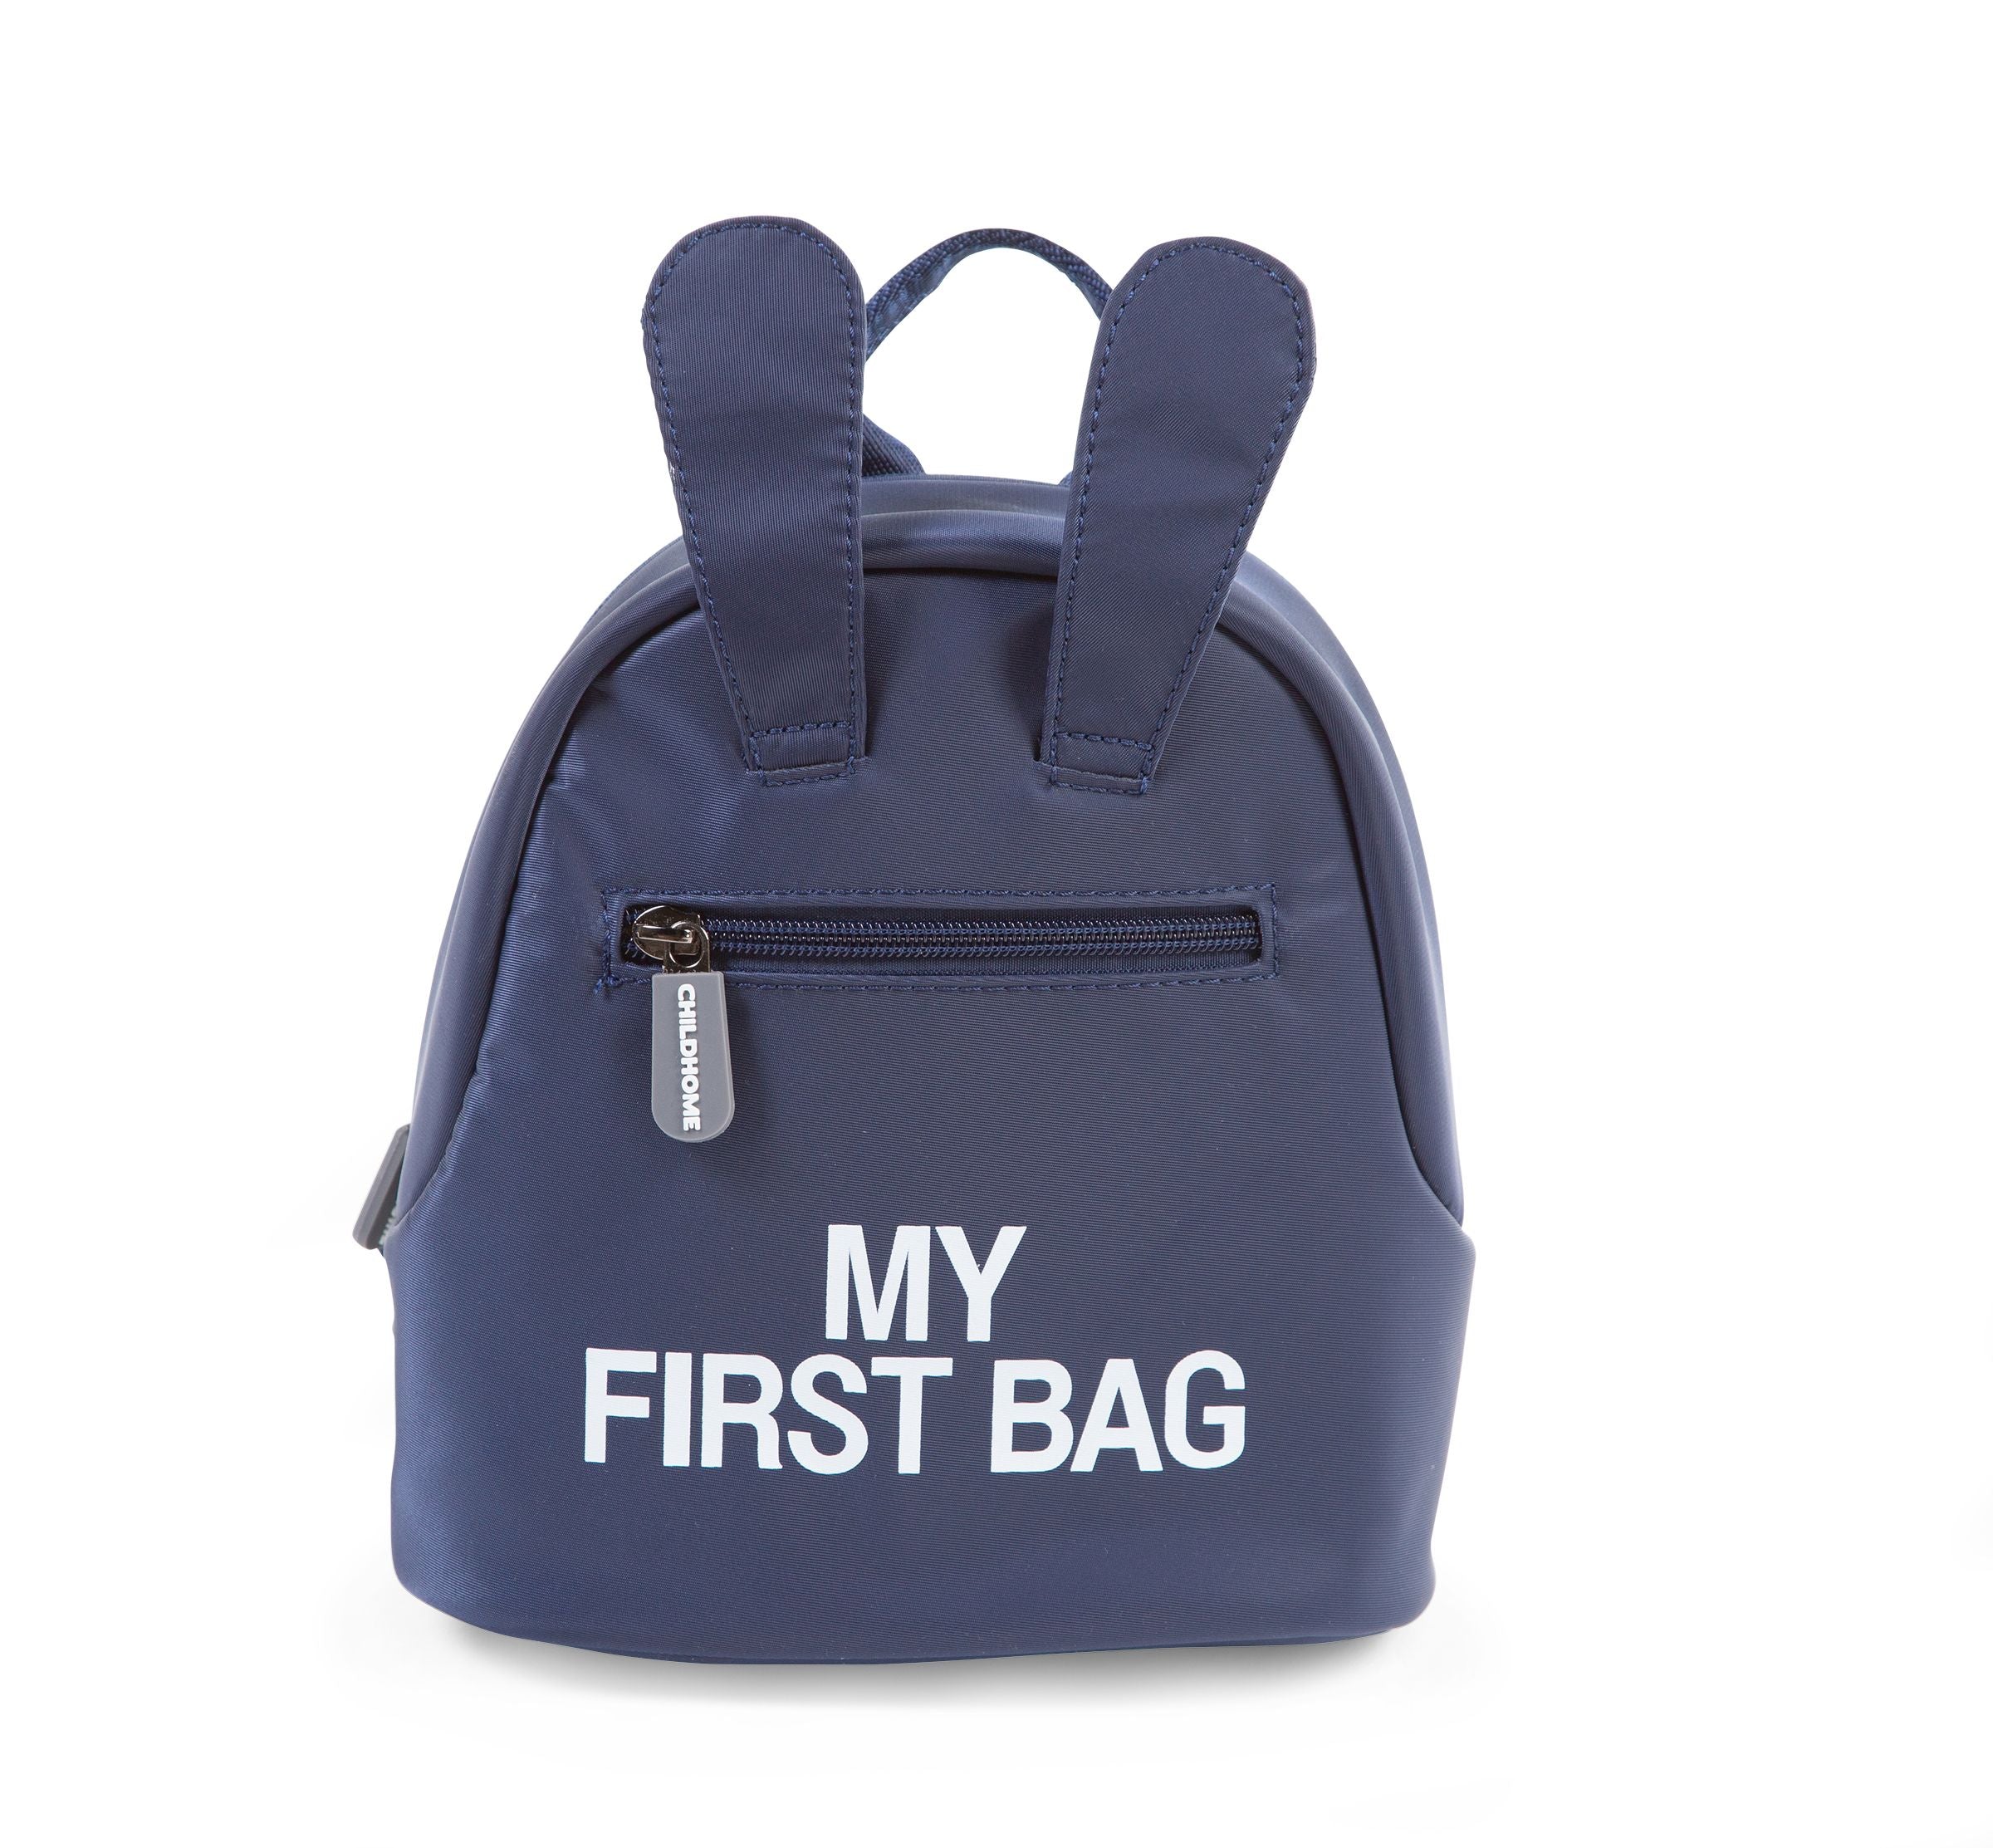 My First Bag Children's Backpack - Navy - MyLullaby